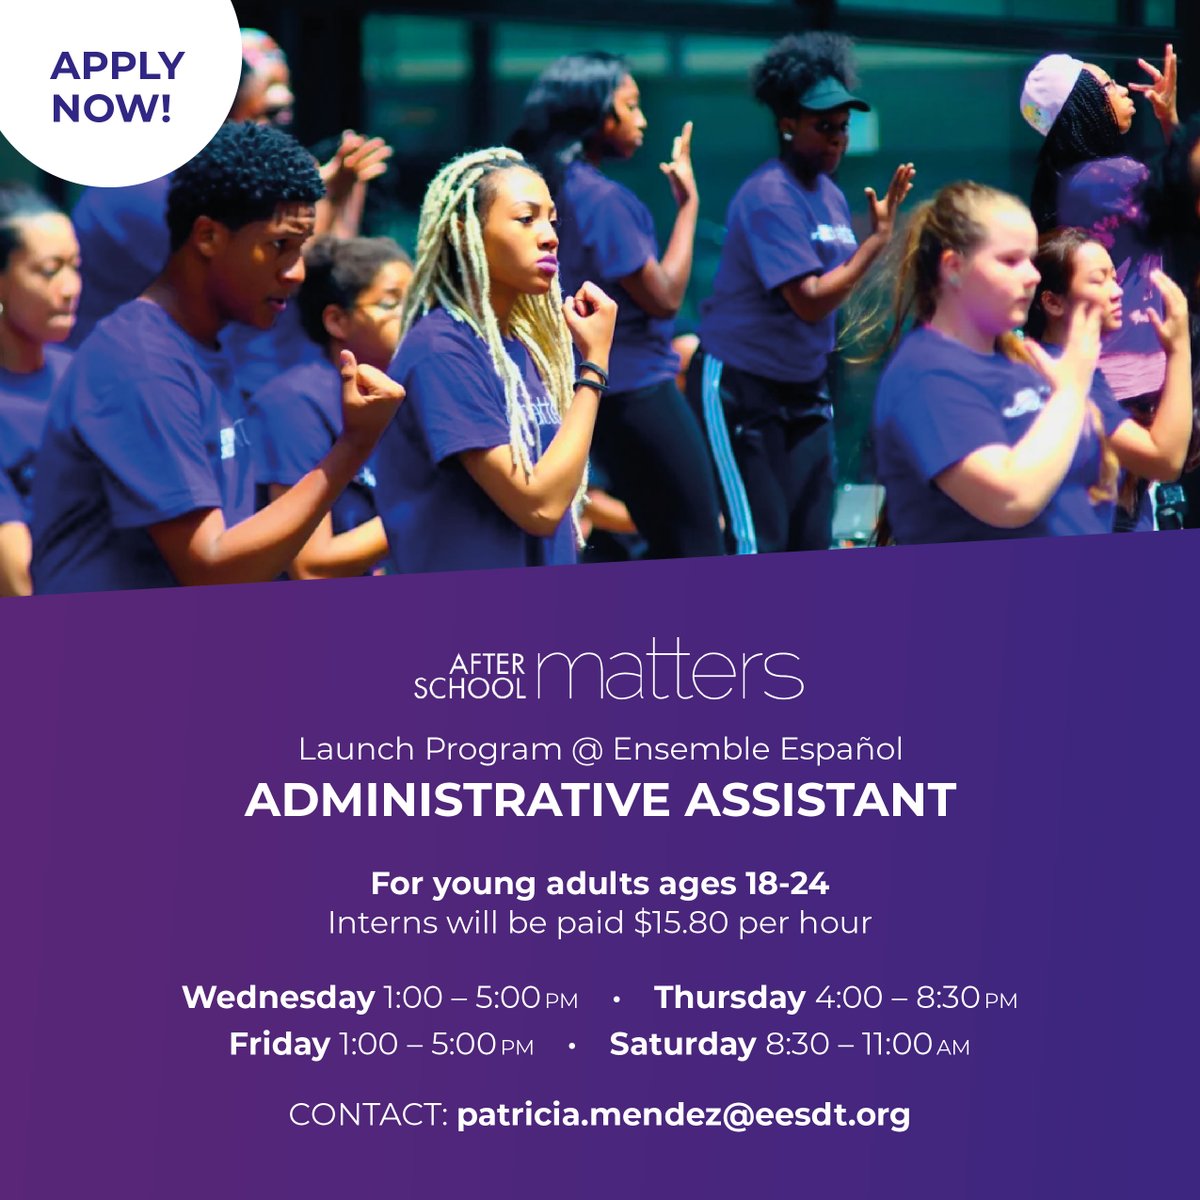 APPLY NOW! Administrative Assistant at Ensemble Español with @AftrSchoolMttrs Launch Program 🚨 For young adults ages 16-24 💰 Interns will be paid $15.80 per hour 📲 CONTACT: patricia.mendez@eesdt.org